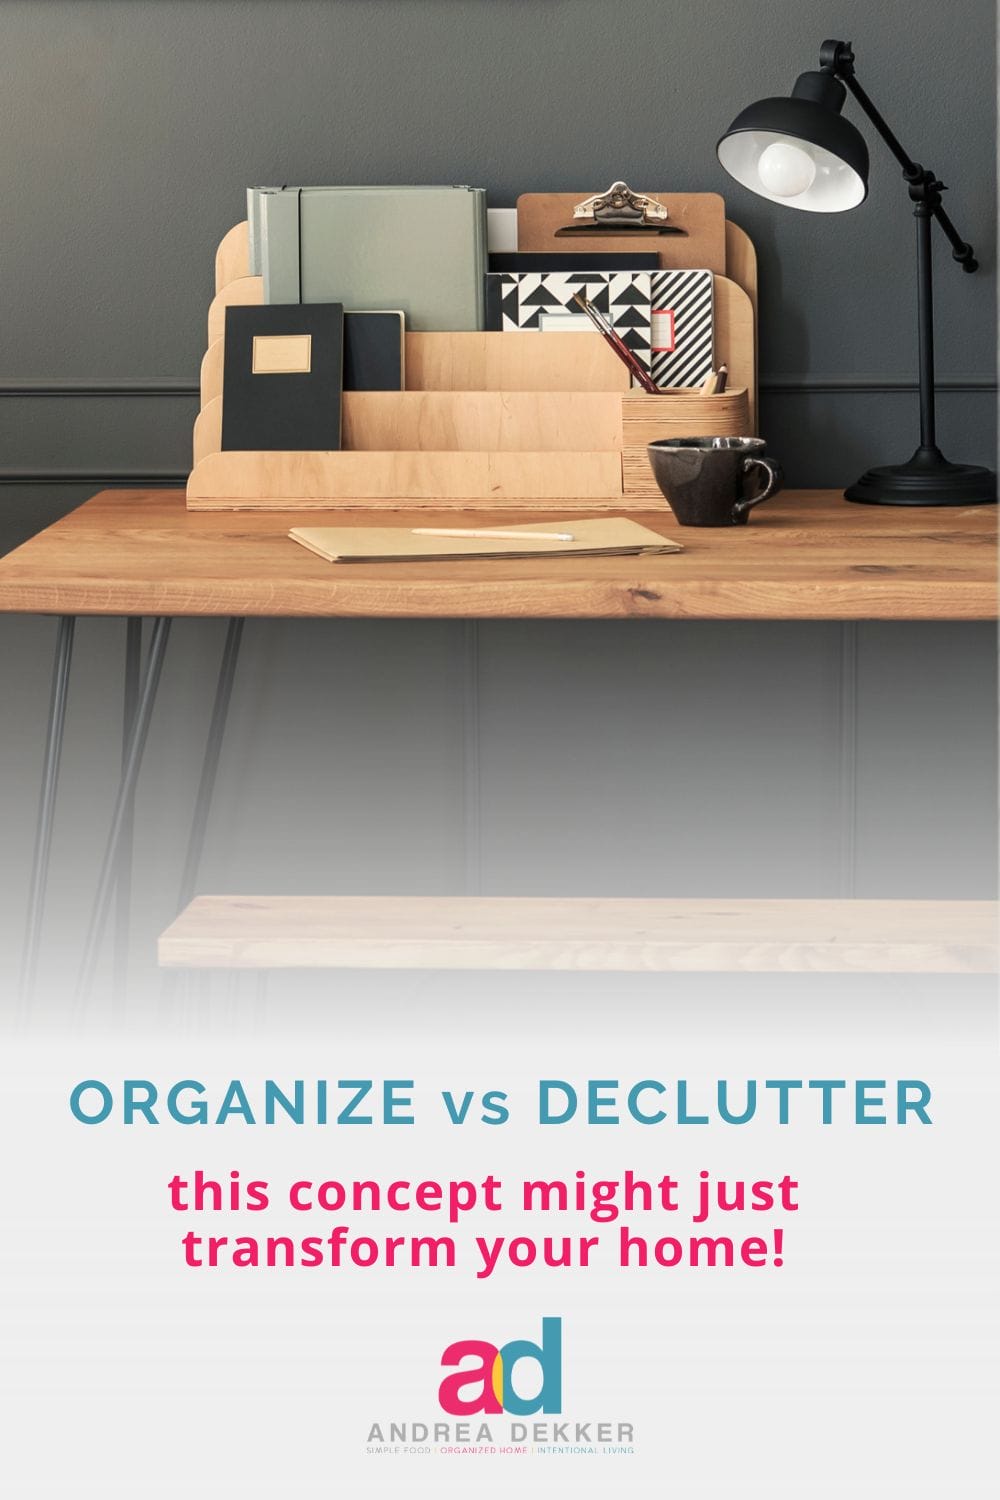 If you feel frustrated on your journey to a simpler, more organized home and life... it might be because you need to stop organizing and start decluttering! This concept could transform your home! via @andreadekker